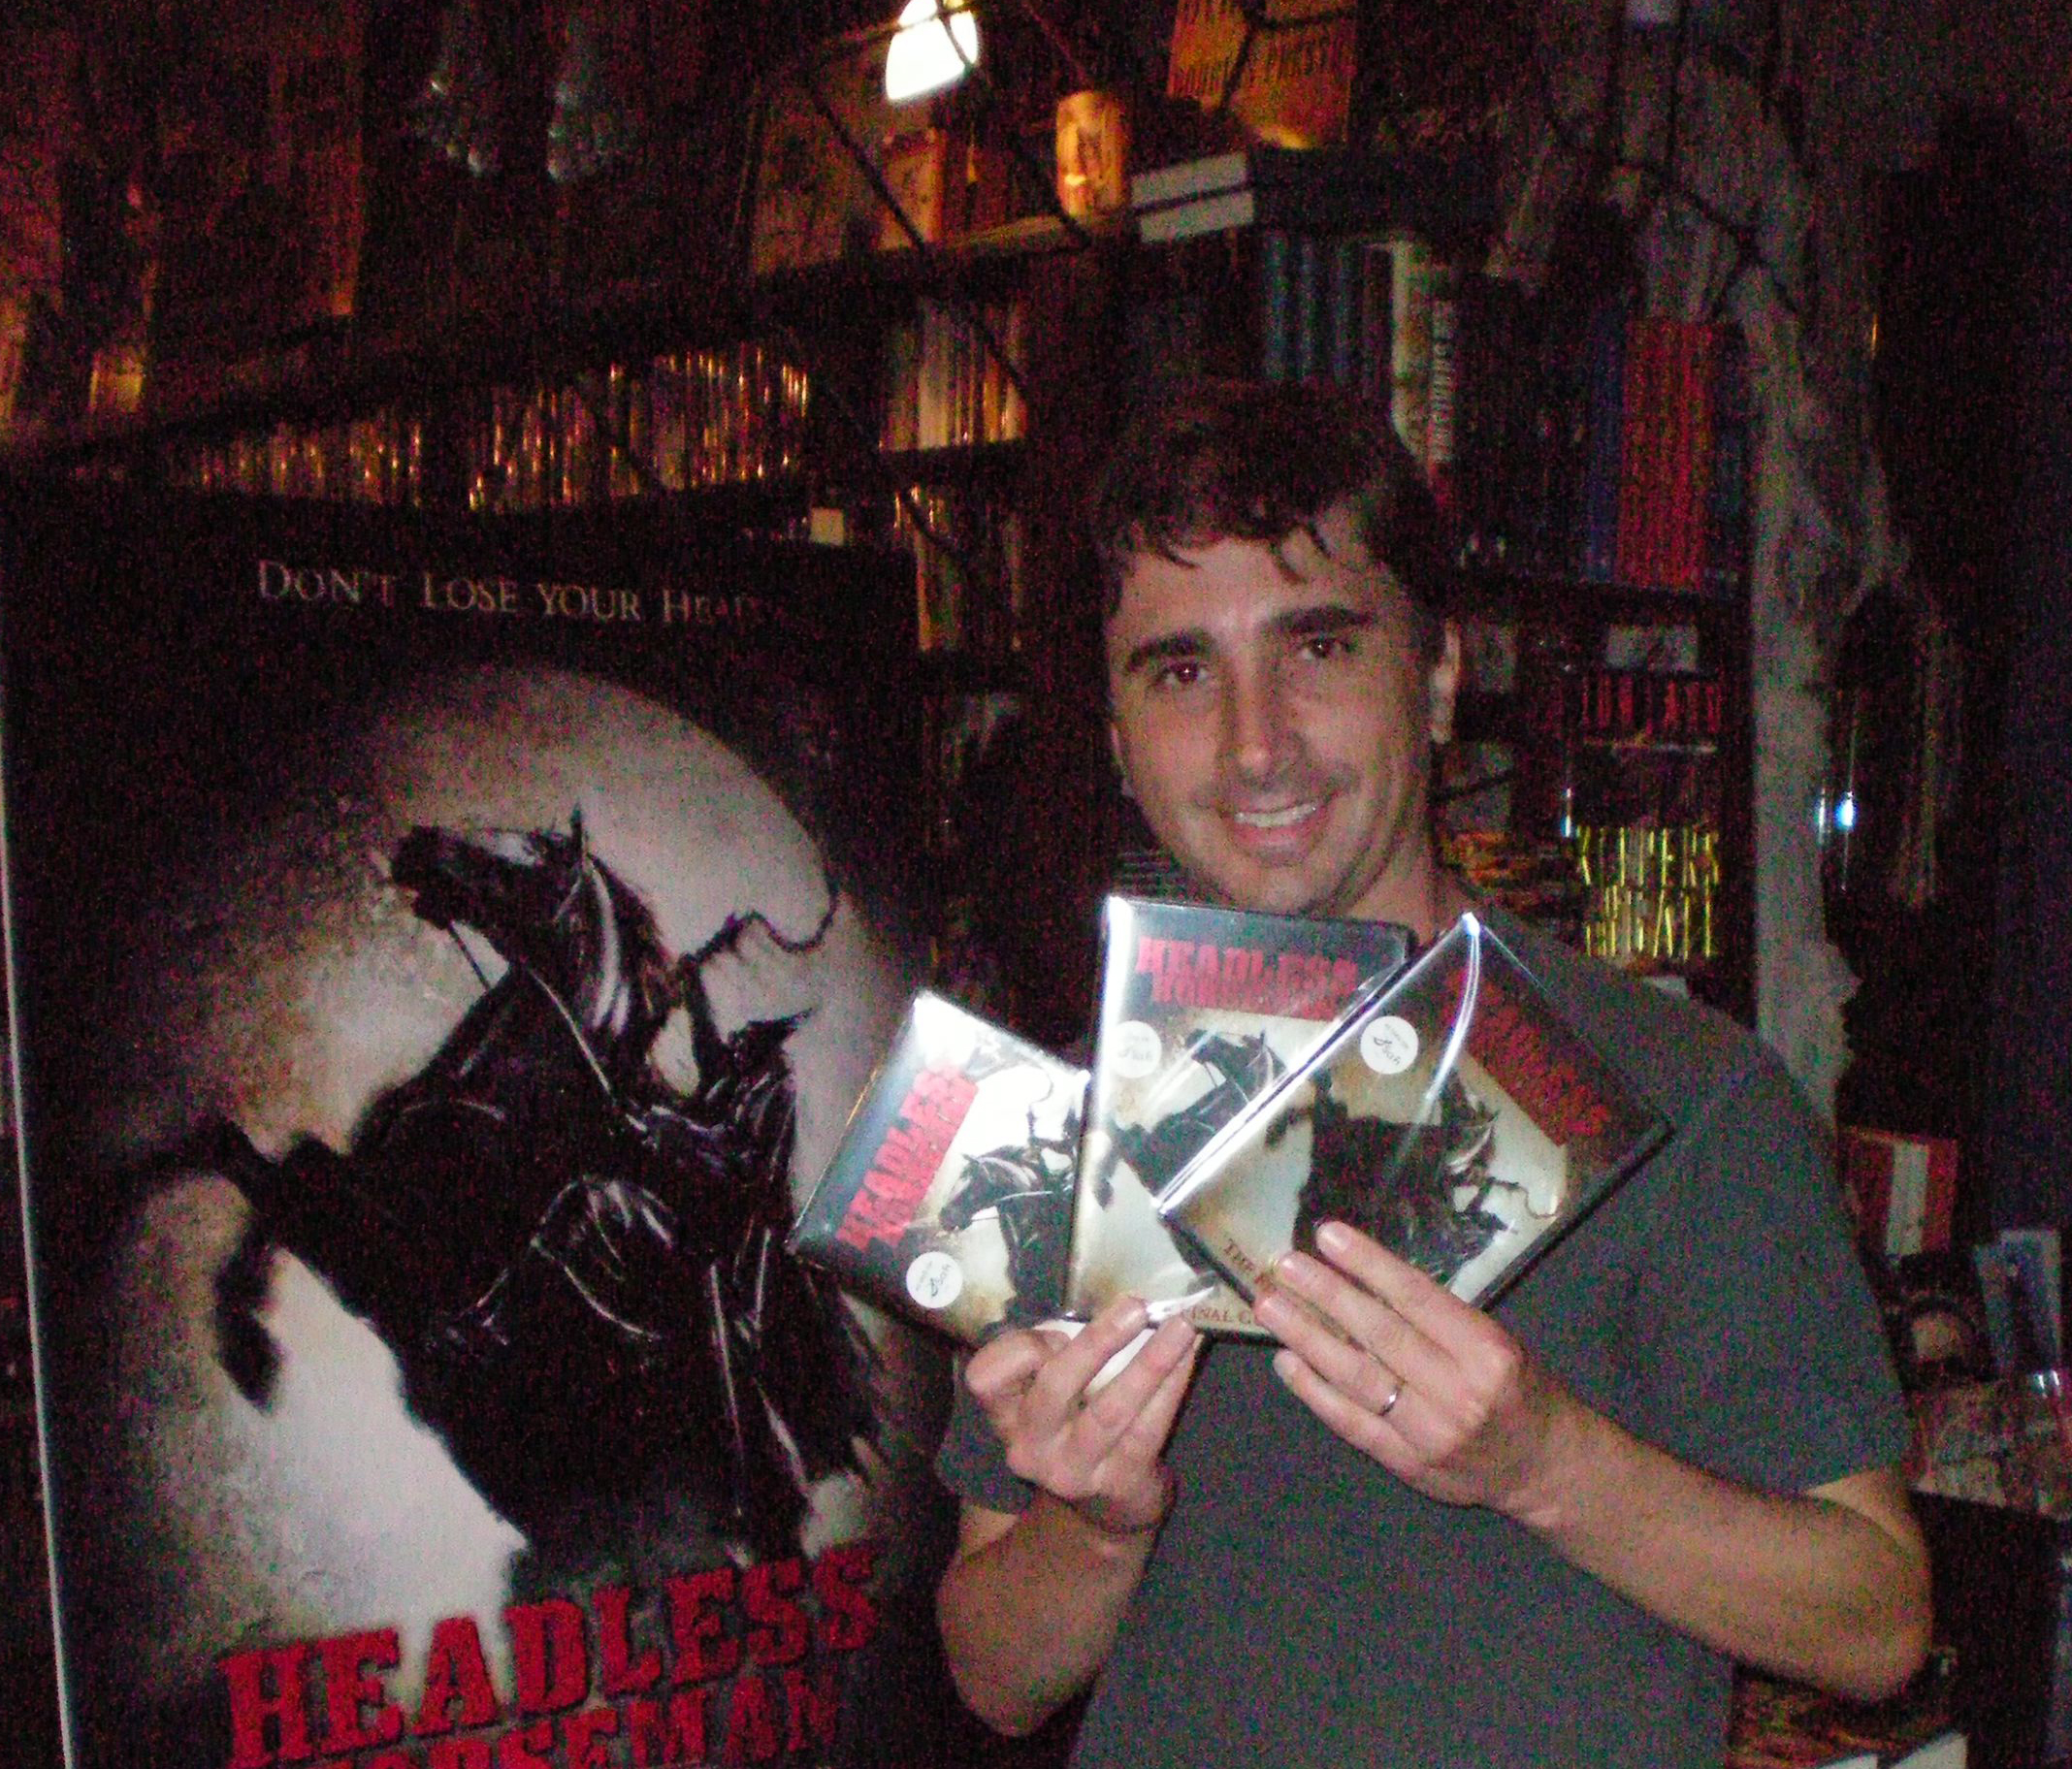 HEADLESS HORSEMAN director and Co-Writer ANTHONY C. FERRANTE at a Dark Delicacies DVD signing